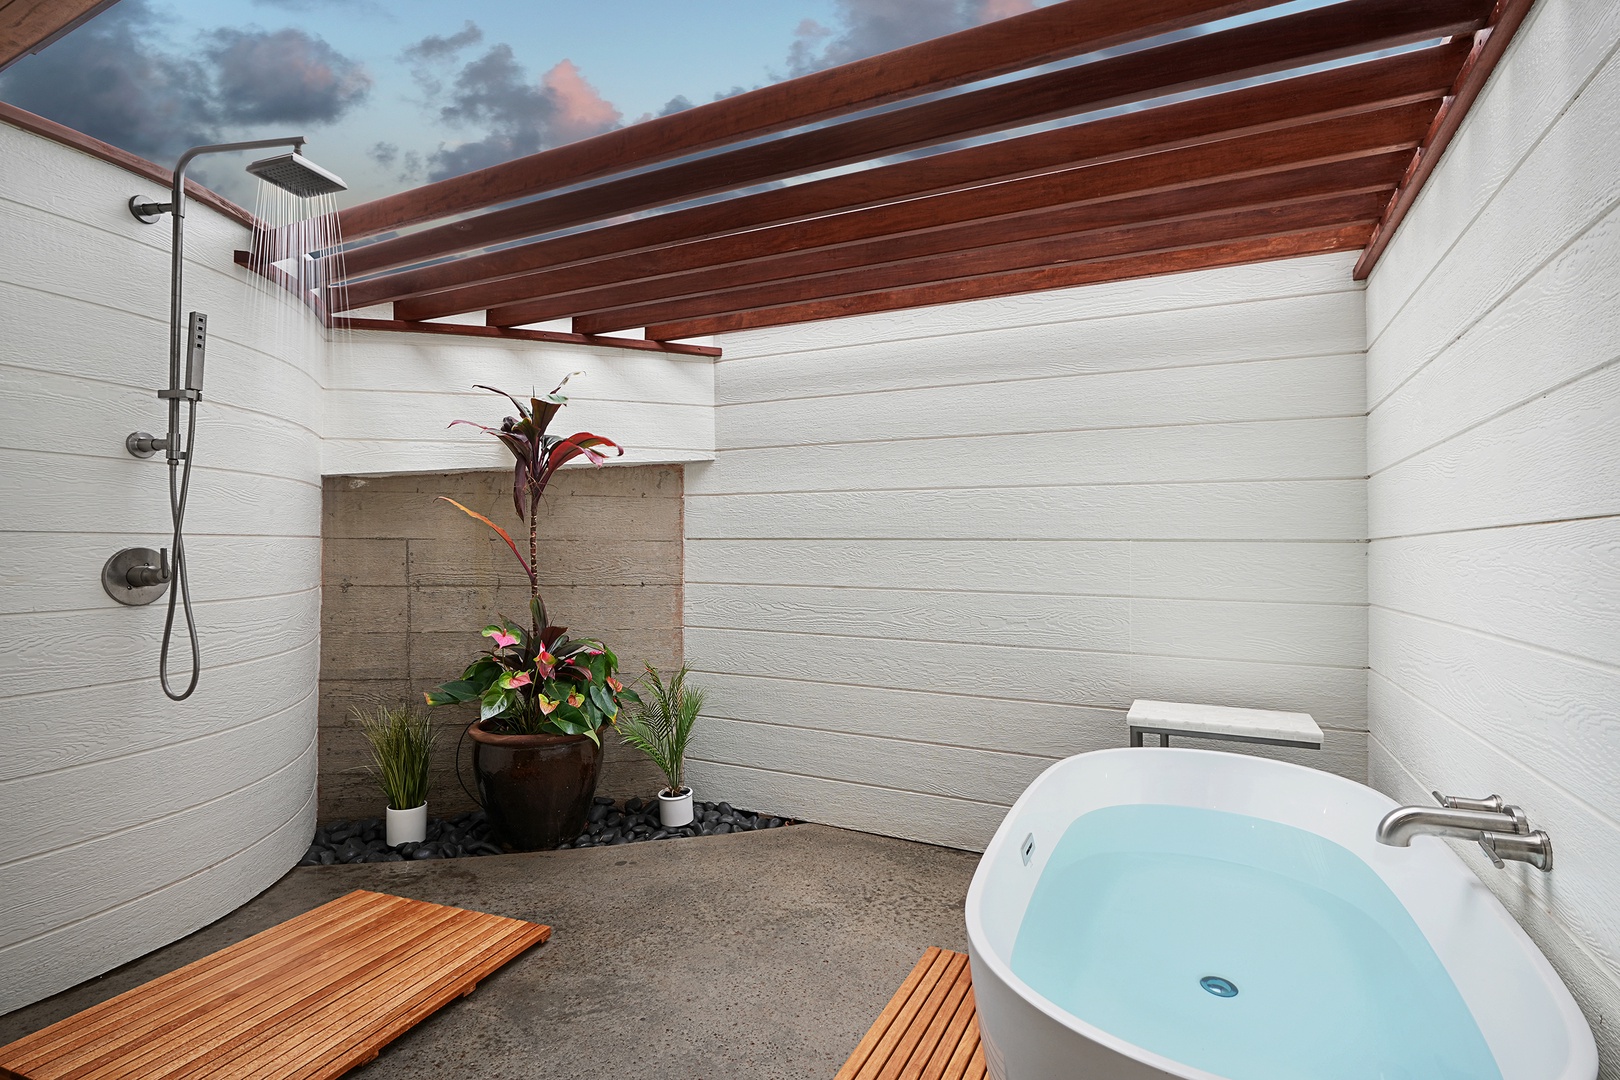 Koloa Vacation Rentals, Hale Keaka at Kukui'ula - Enjoy the private outdoor shower, just off the primary guest bedroom.